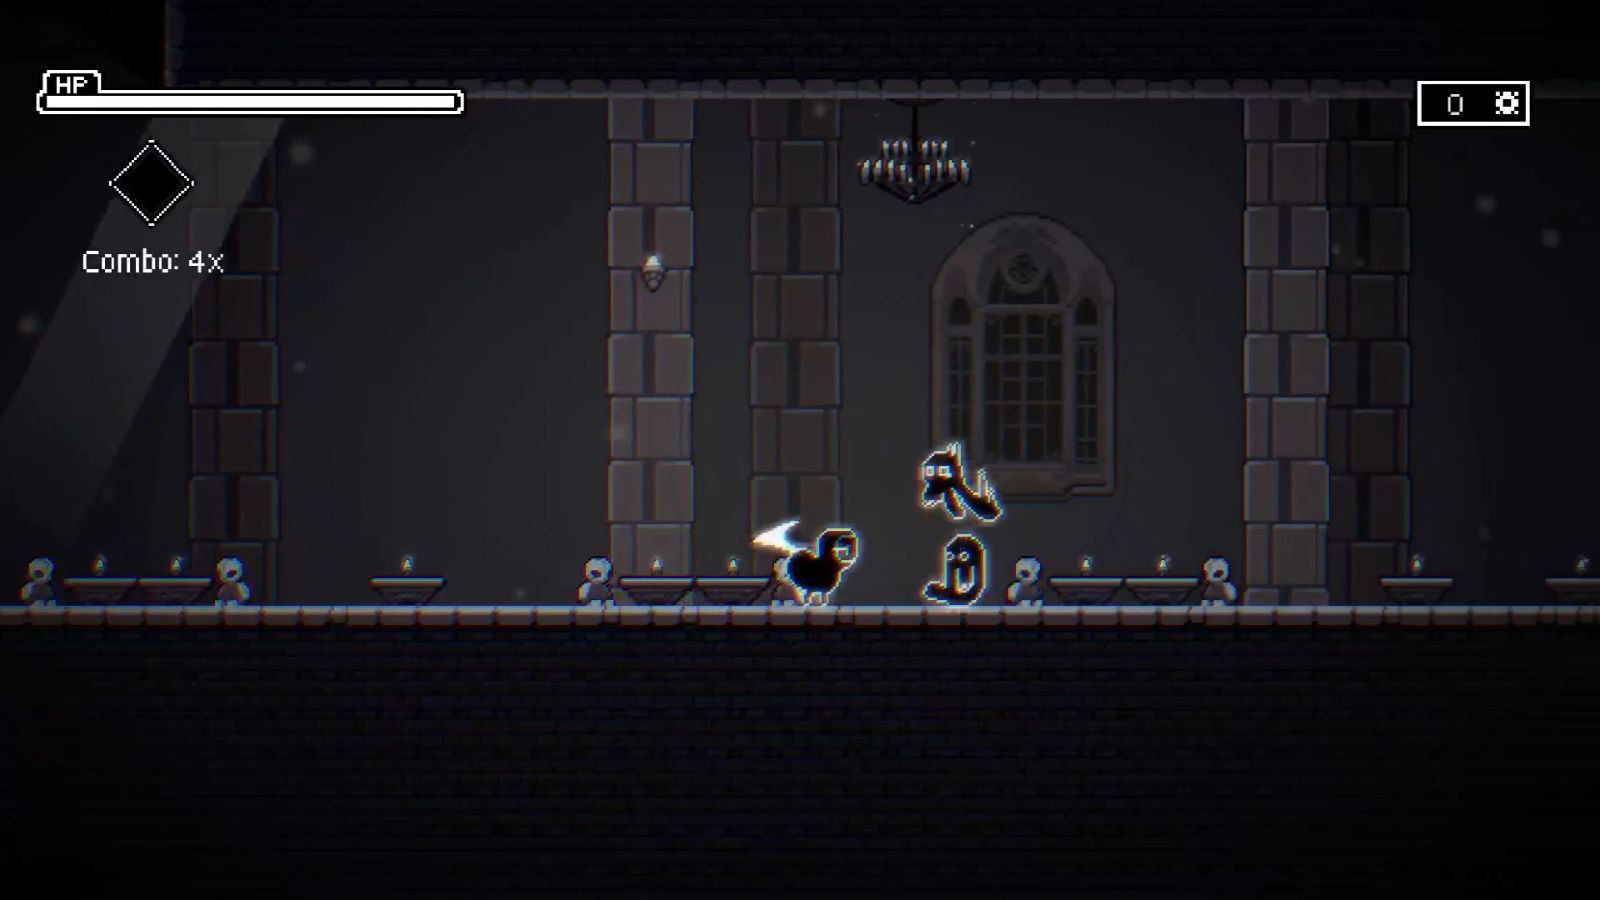 A hooded character attacks two ghostly enemies.